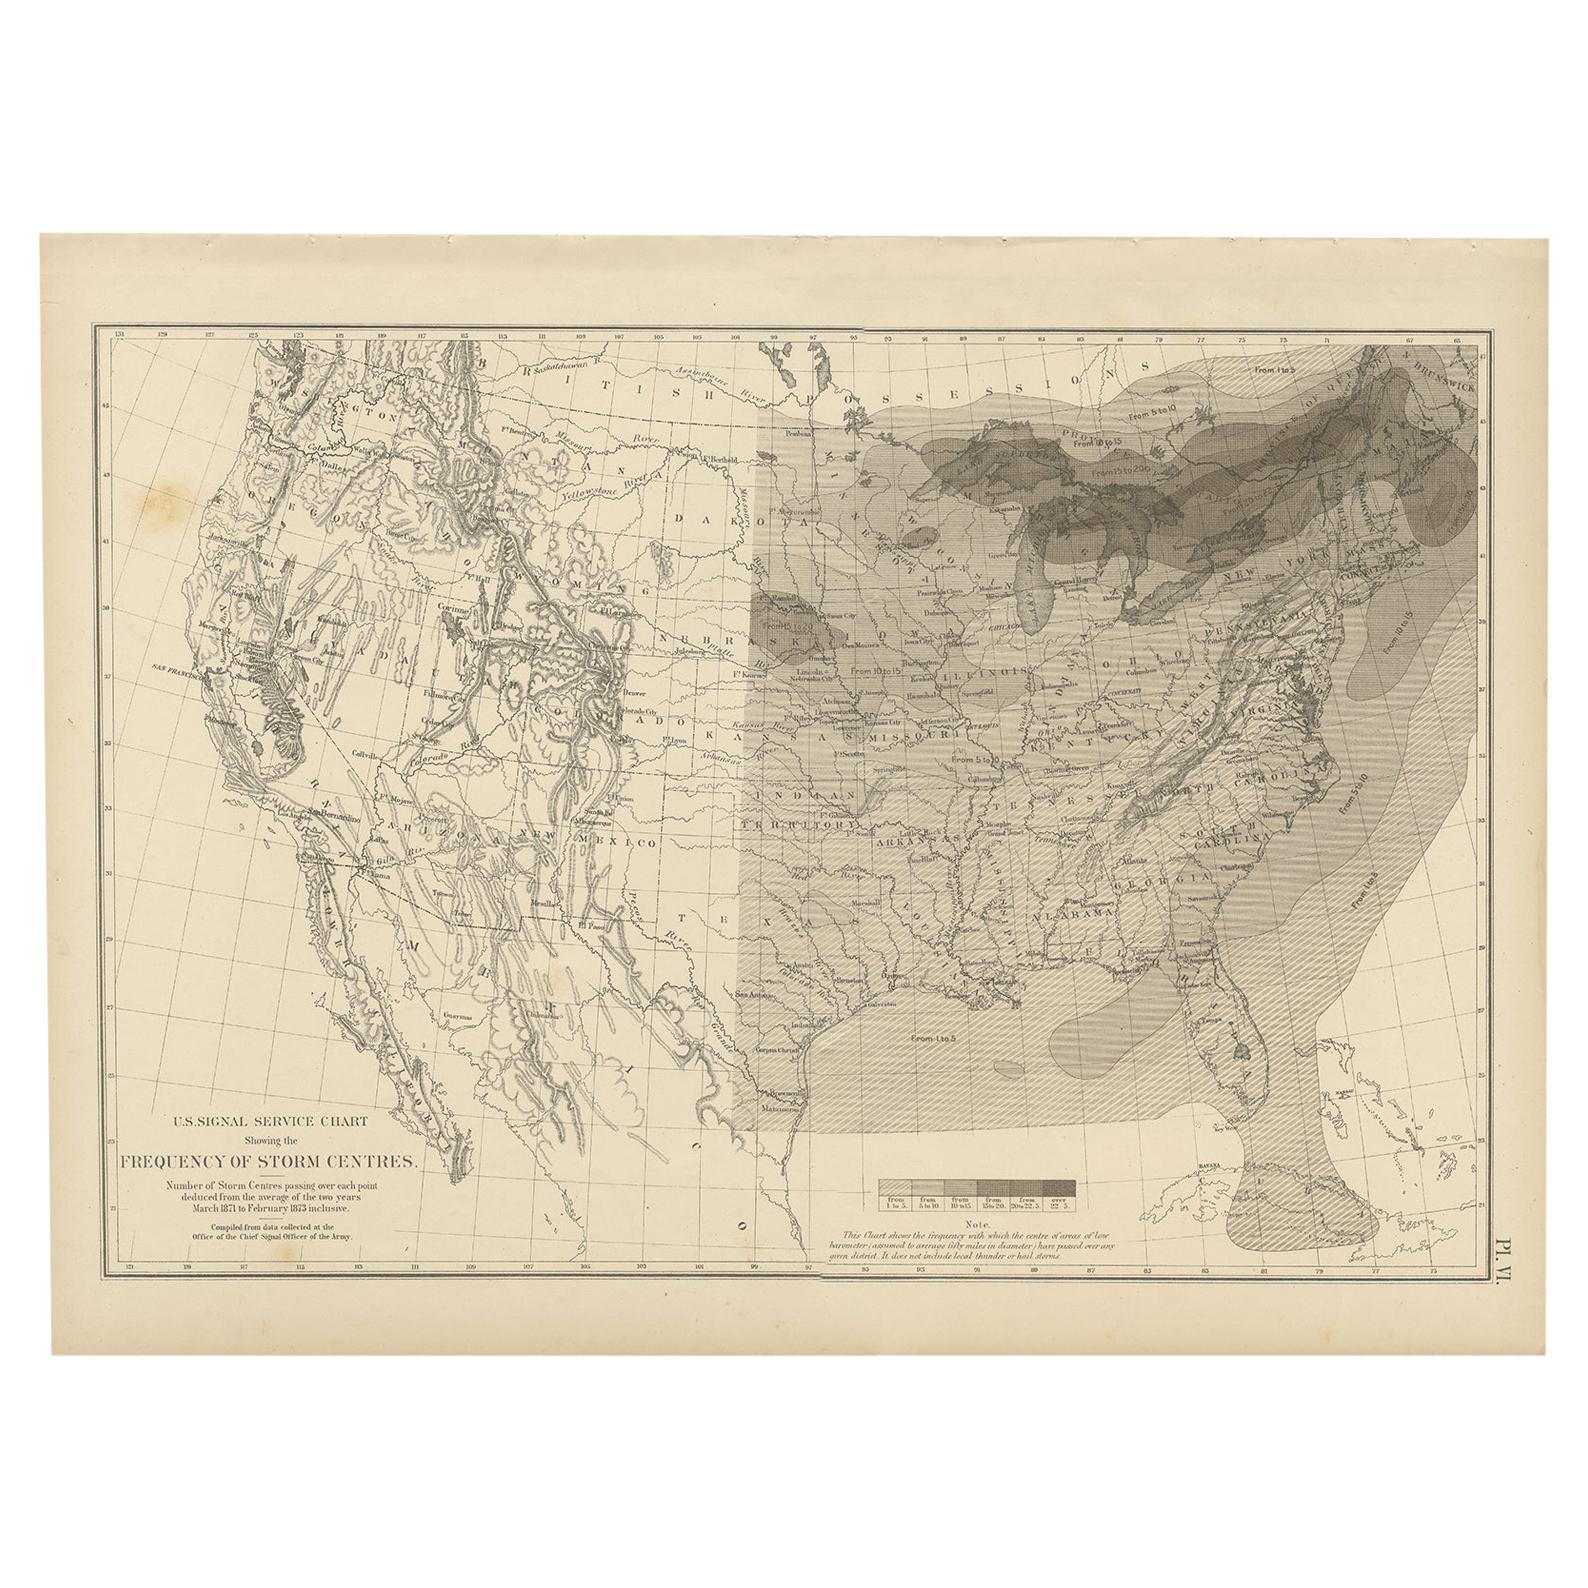 Antique Chart of the Storm Centres of the United States, 1874